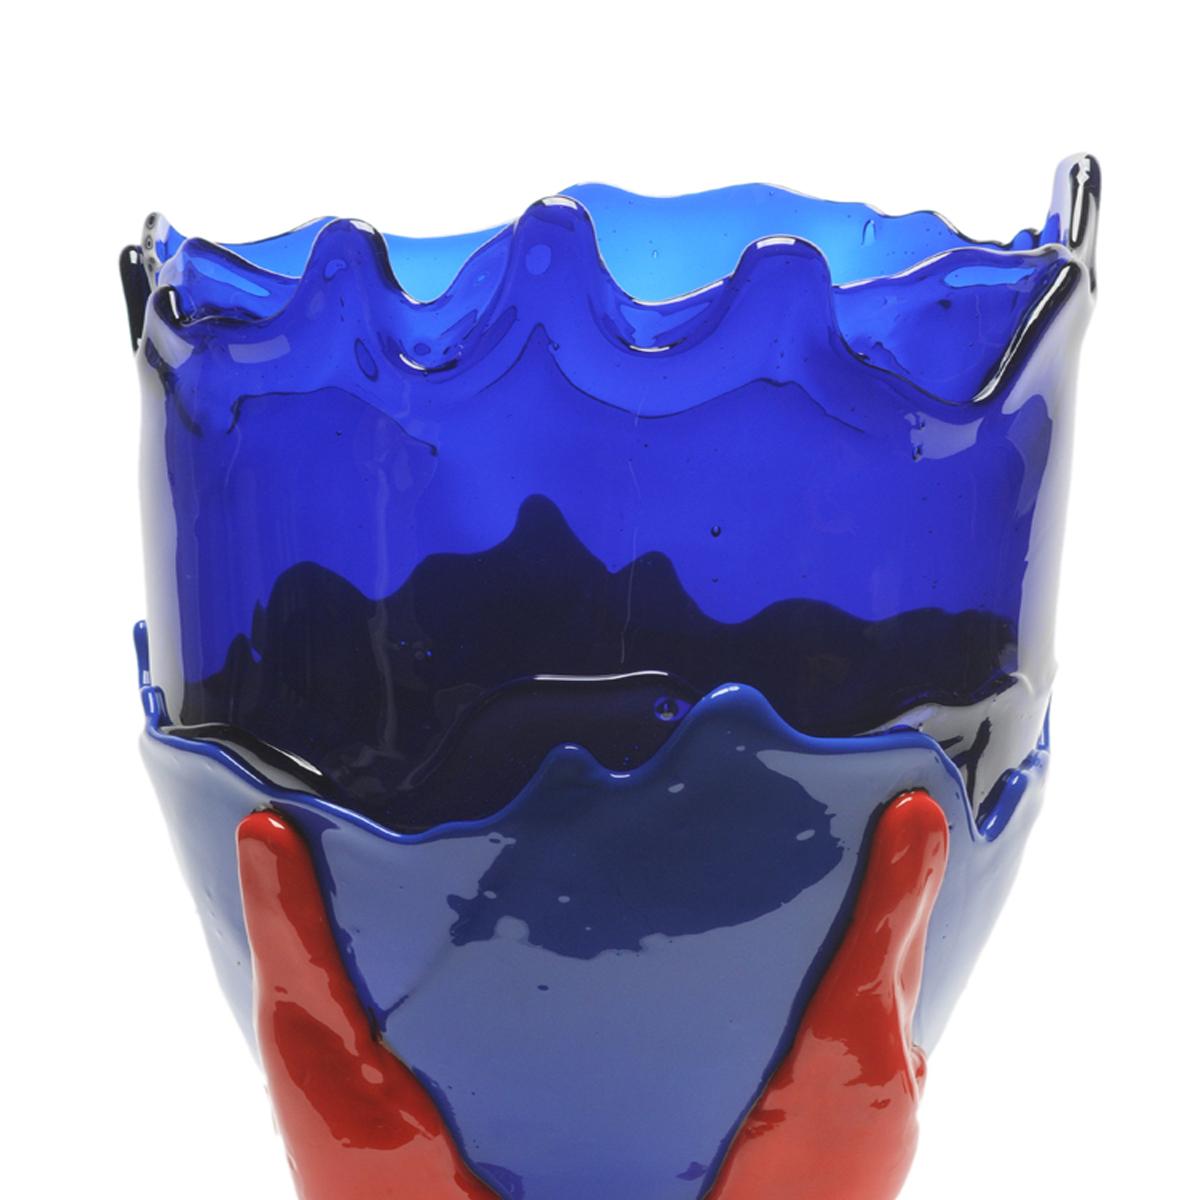 Clear extra colour vase - clear blue Klein, matt blue, matt red.

Vase in soft resin designed by Gaetano Pesce in 1995 for Fish Design collection.

Measures: M - Ø 16cm x H 26cm

Other sizes available.
Vase in soft resin designed by Gaetano